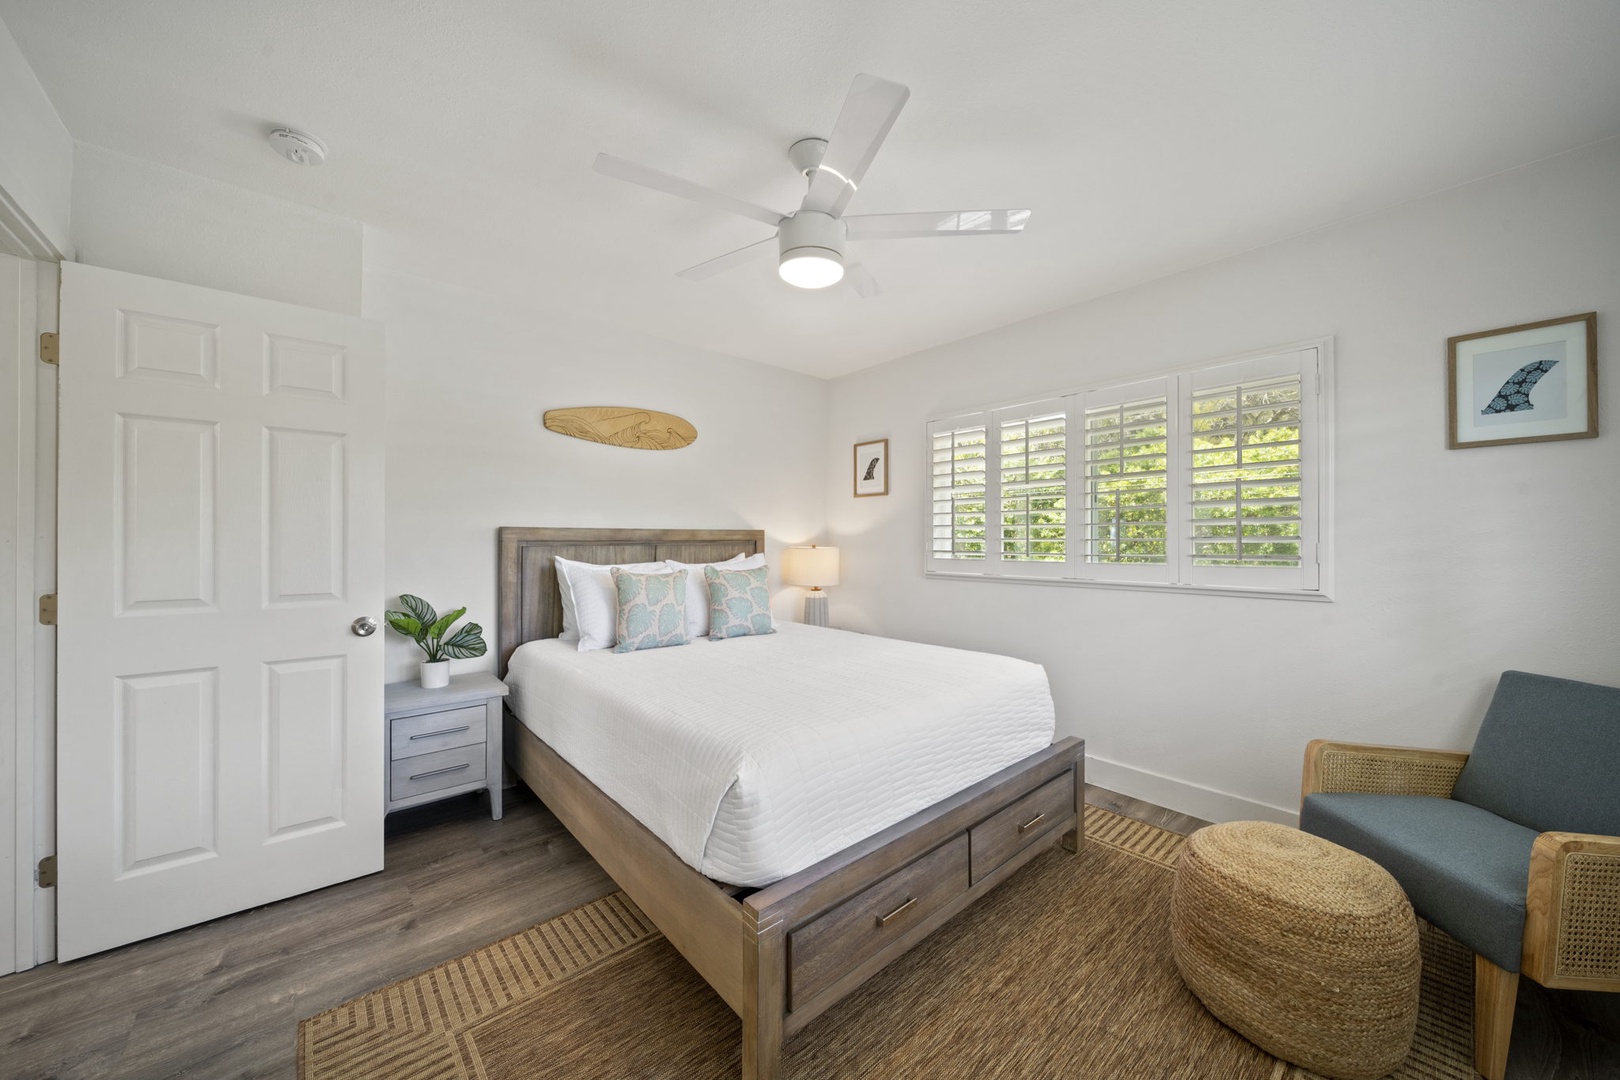 Haleiwa Vacation Rentals, Hale Nalu - Guest Bedroom #5 has a queen size bed, ceiling fan, and split A/C